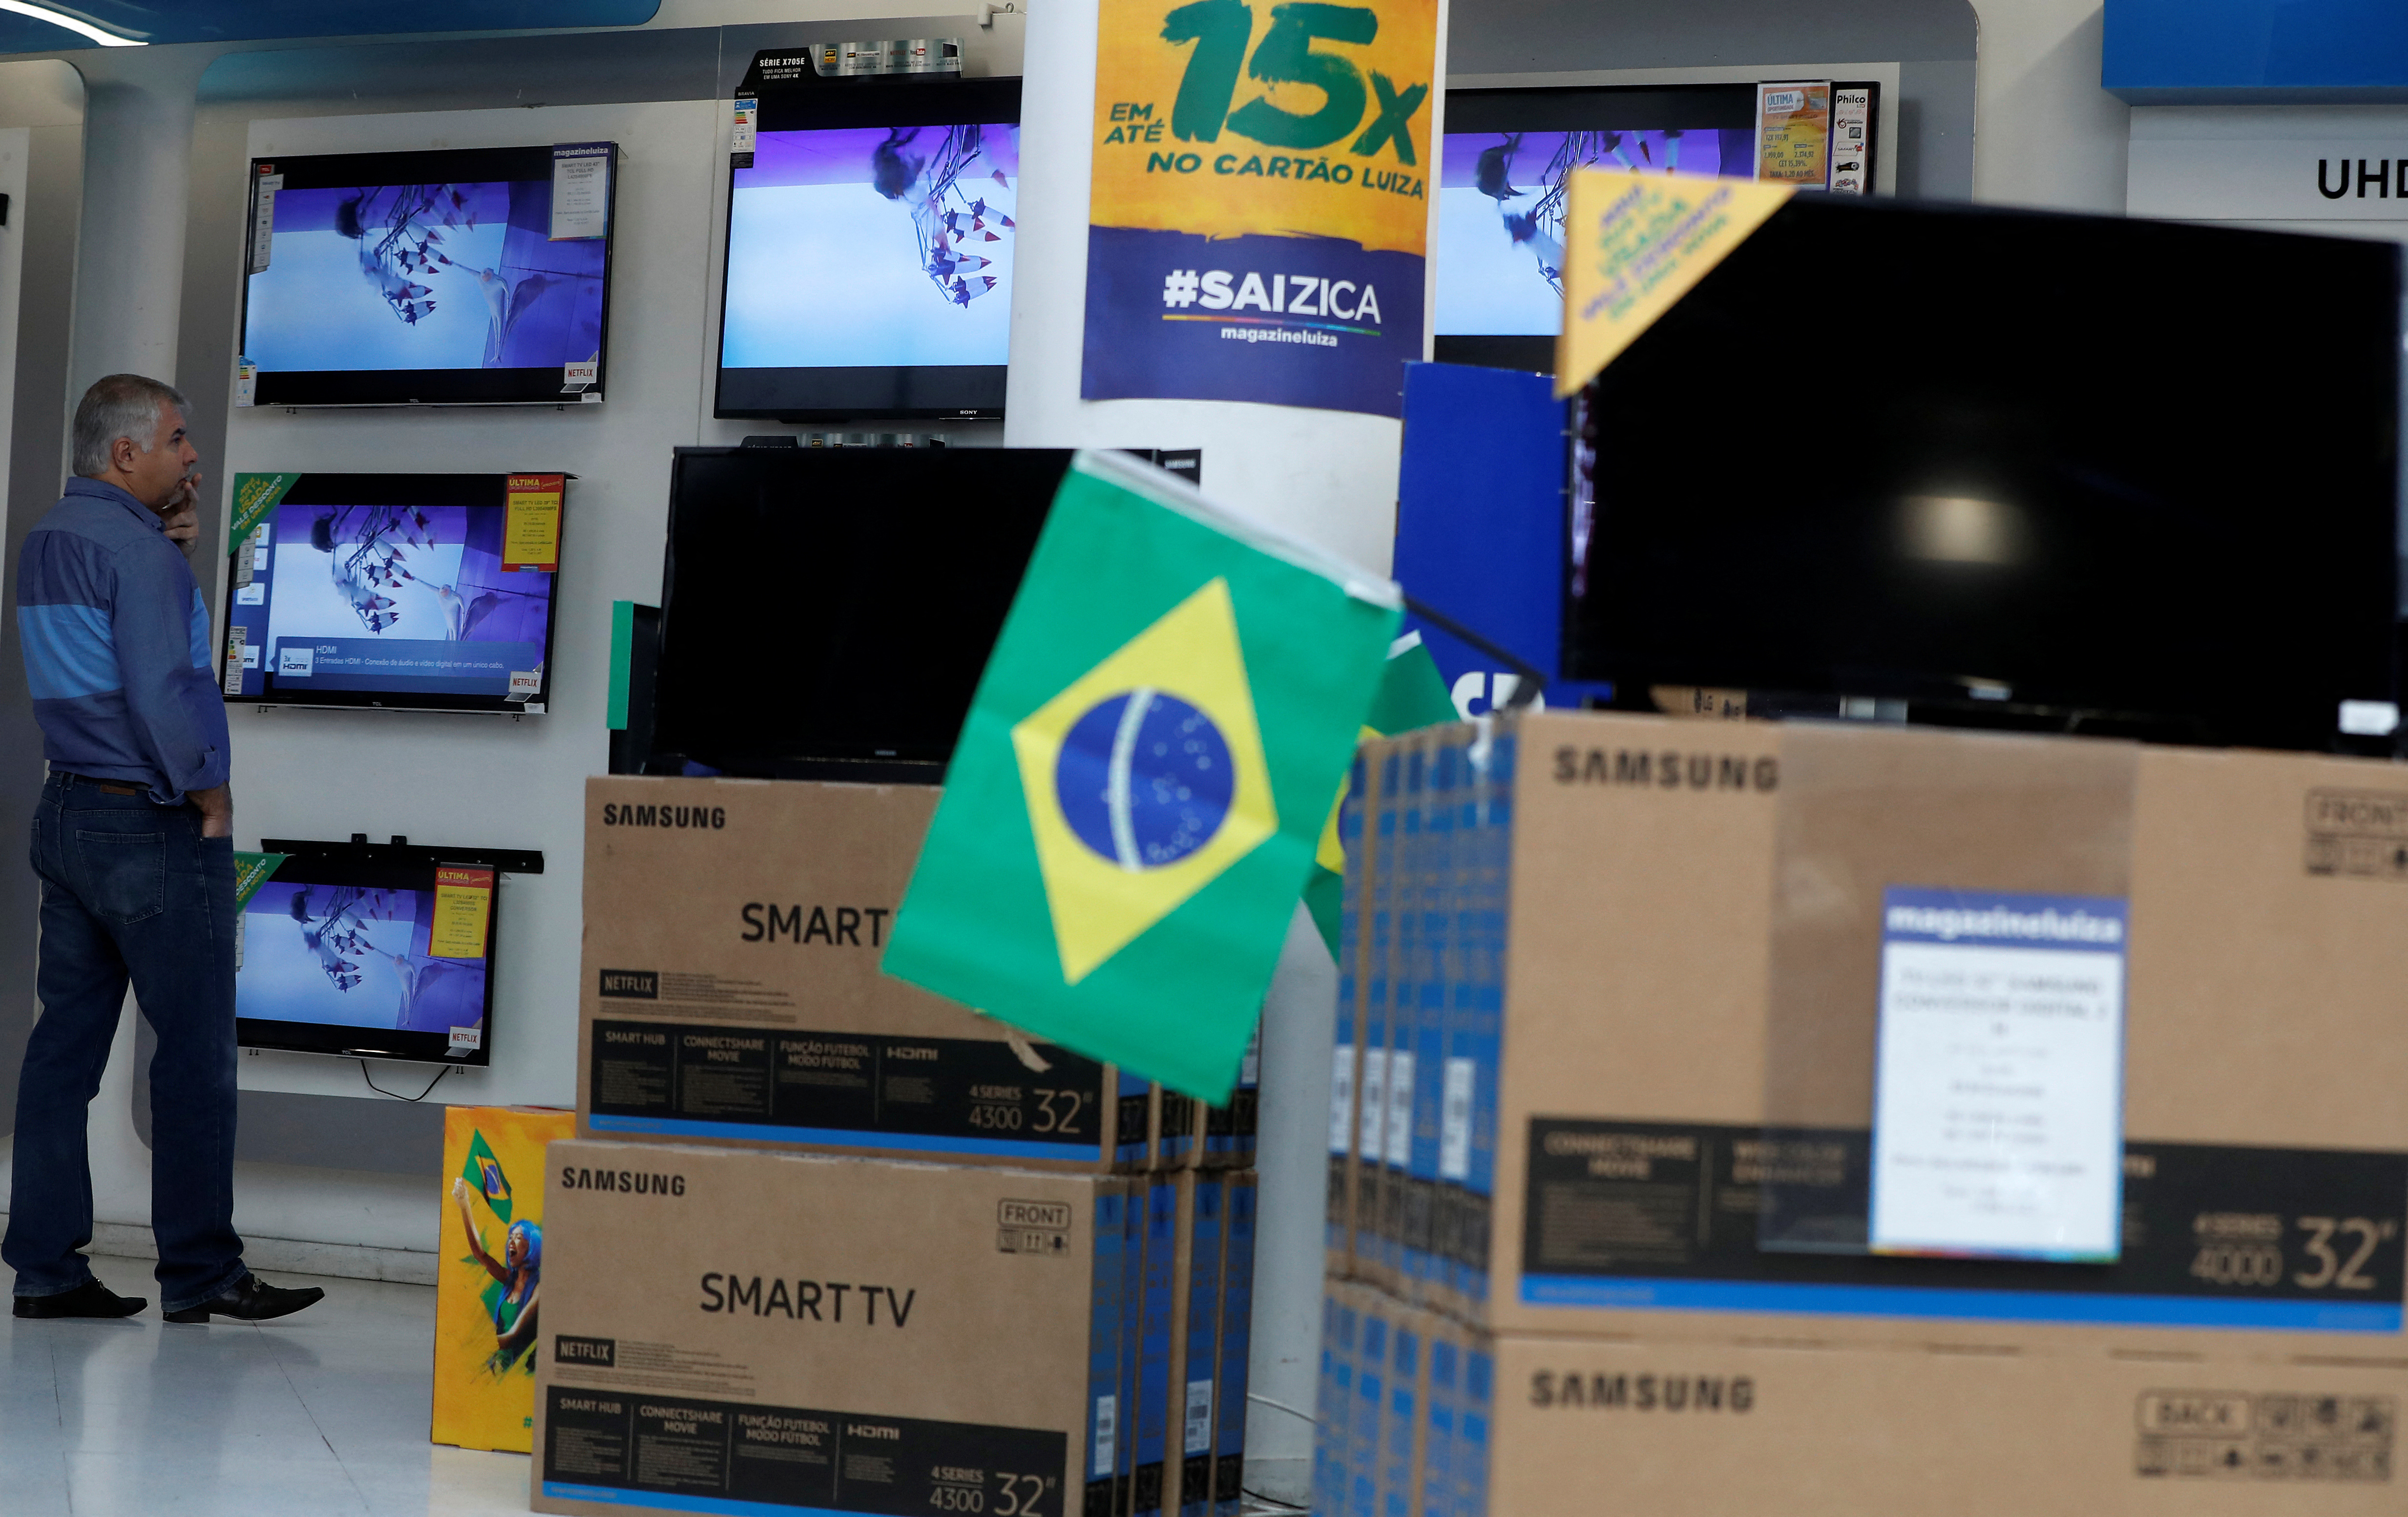 A man checks prices of television sets for sale in a store in Sao Paulo